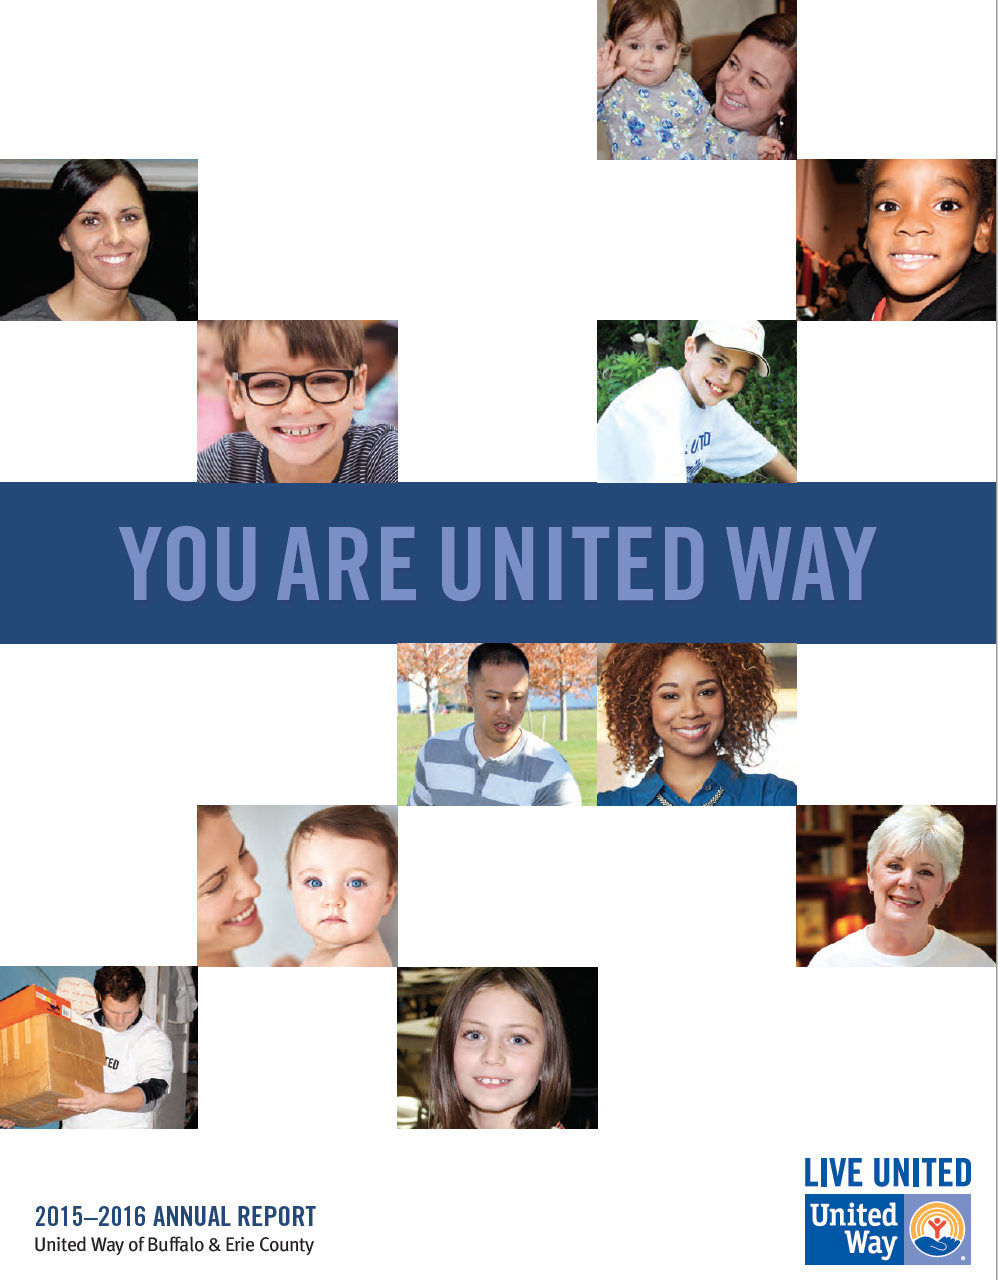 You are United Way annual report